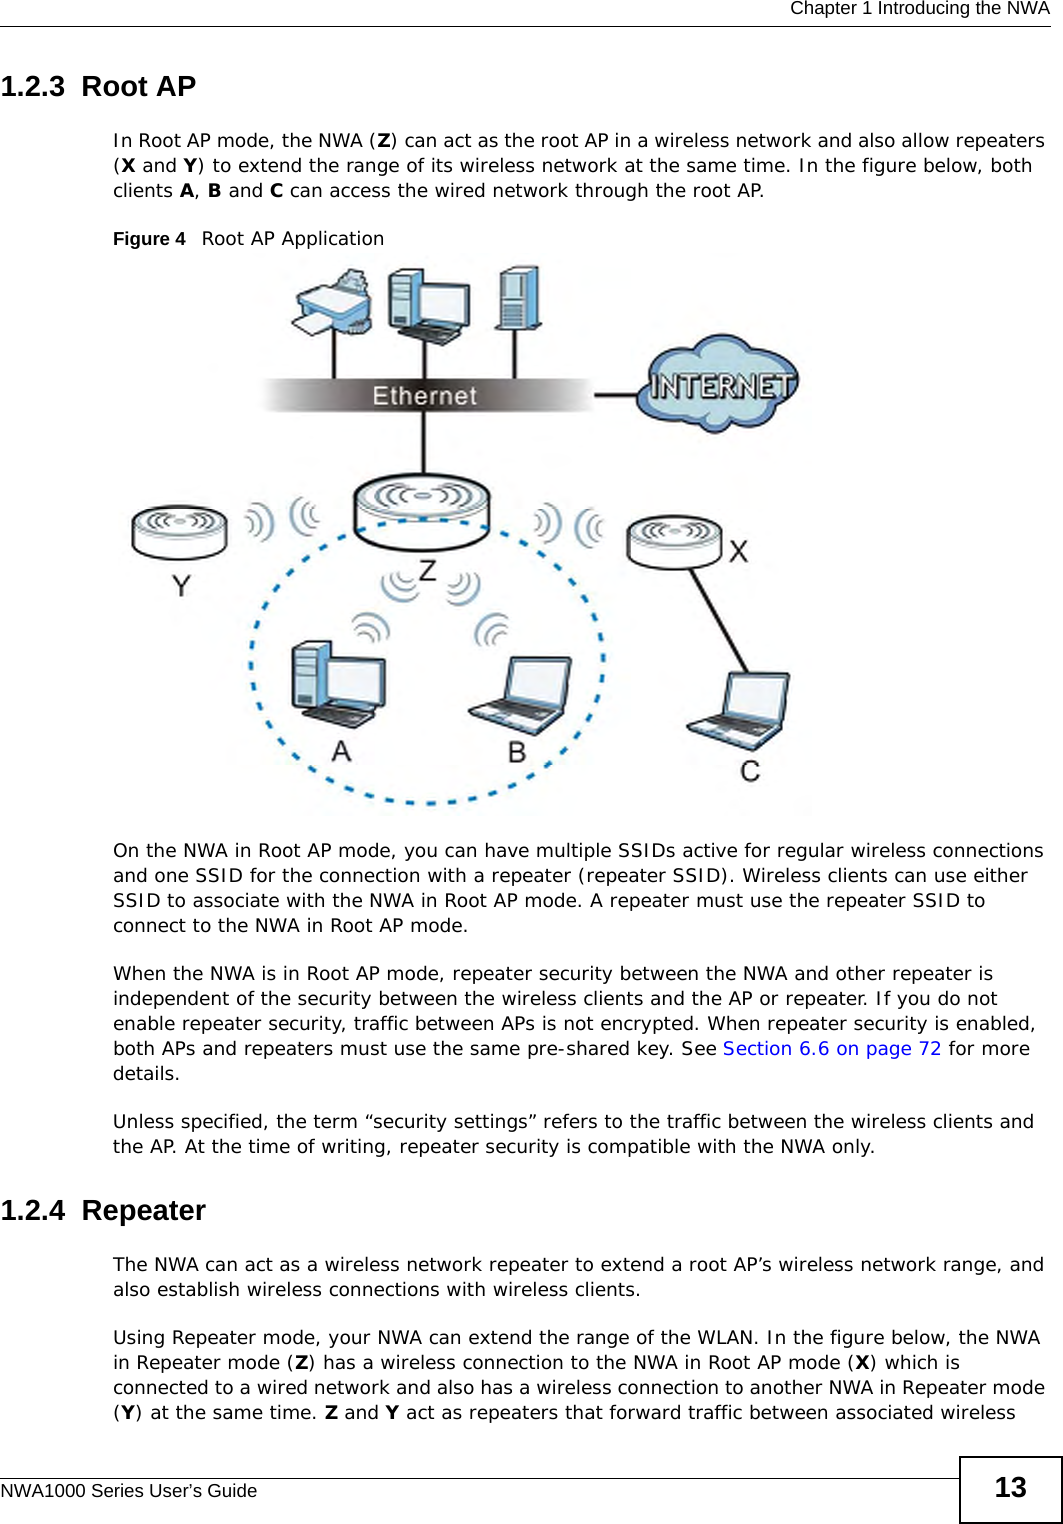  Chapter 1 Introducing the NWANWA1000 Series User’s Guide 131.2.3  Root APIn Root AP mode, the NWA (Z) can act as the root AP in a wireless network and also allow repeaters (X and Y) to extend the range of its wireless network at the same time. In the figure below, both clients A, B and C can access the wired network through the root AP.Figure 4   Root AP Application On the NWA in Root AP mode, you can have multiple SSIDs active for regular wireless connections and one SSID for the connection with a repeater (repeater SSID). Wireless clients can use either SSID to associate with the NWA in Root AP mode. A repeater must use the repeater SSID to connect to the NWA in Root AP mode.When the NWA is in Root AP mode, repeater security between the NWA and other repeater is independent of the security between the wireless clients and the AP or repeater. If you do not enable repeater security, traffic between APs is not encrypted. When repeater security is enabled, both APs and repeaters must use the same pre-shared key. See Section 6.6 on page 72 for more details.Unless specified, the term “security settings” refers to the traffic between the wireless clients and the AP. At the time of writing, repeater security is compatible with the NWA only. 1.2.4  RepeaterThe NWA can act as a wireless network repeater to extend a root AP’s wireless network range, and also establish wireless connections with wireless clients. Using Repeater mode, your NWA can extend the range of the WLAN. In the figure below, the NWA in Repeater mode (Z) has a wireless connection to the NWA in Root AP mode (X) which is connected to a wired network and also has a wireless connection to another NWA in Repeater mode (Y) at the same time. Z and Y act as repeaters that forward traffic between associated wireless 